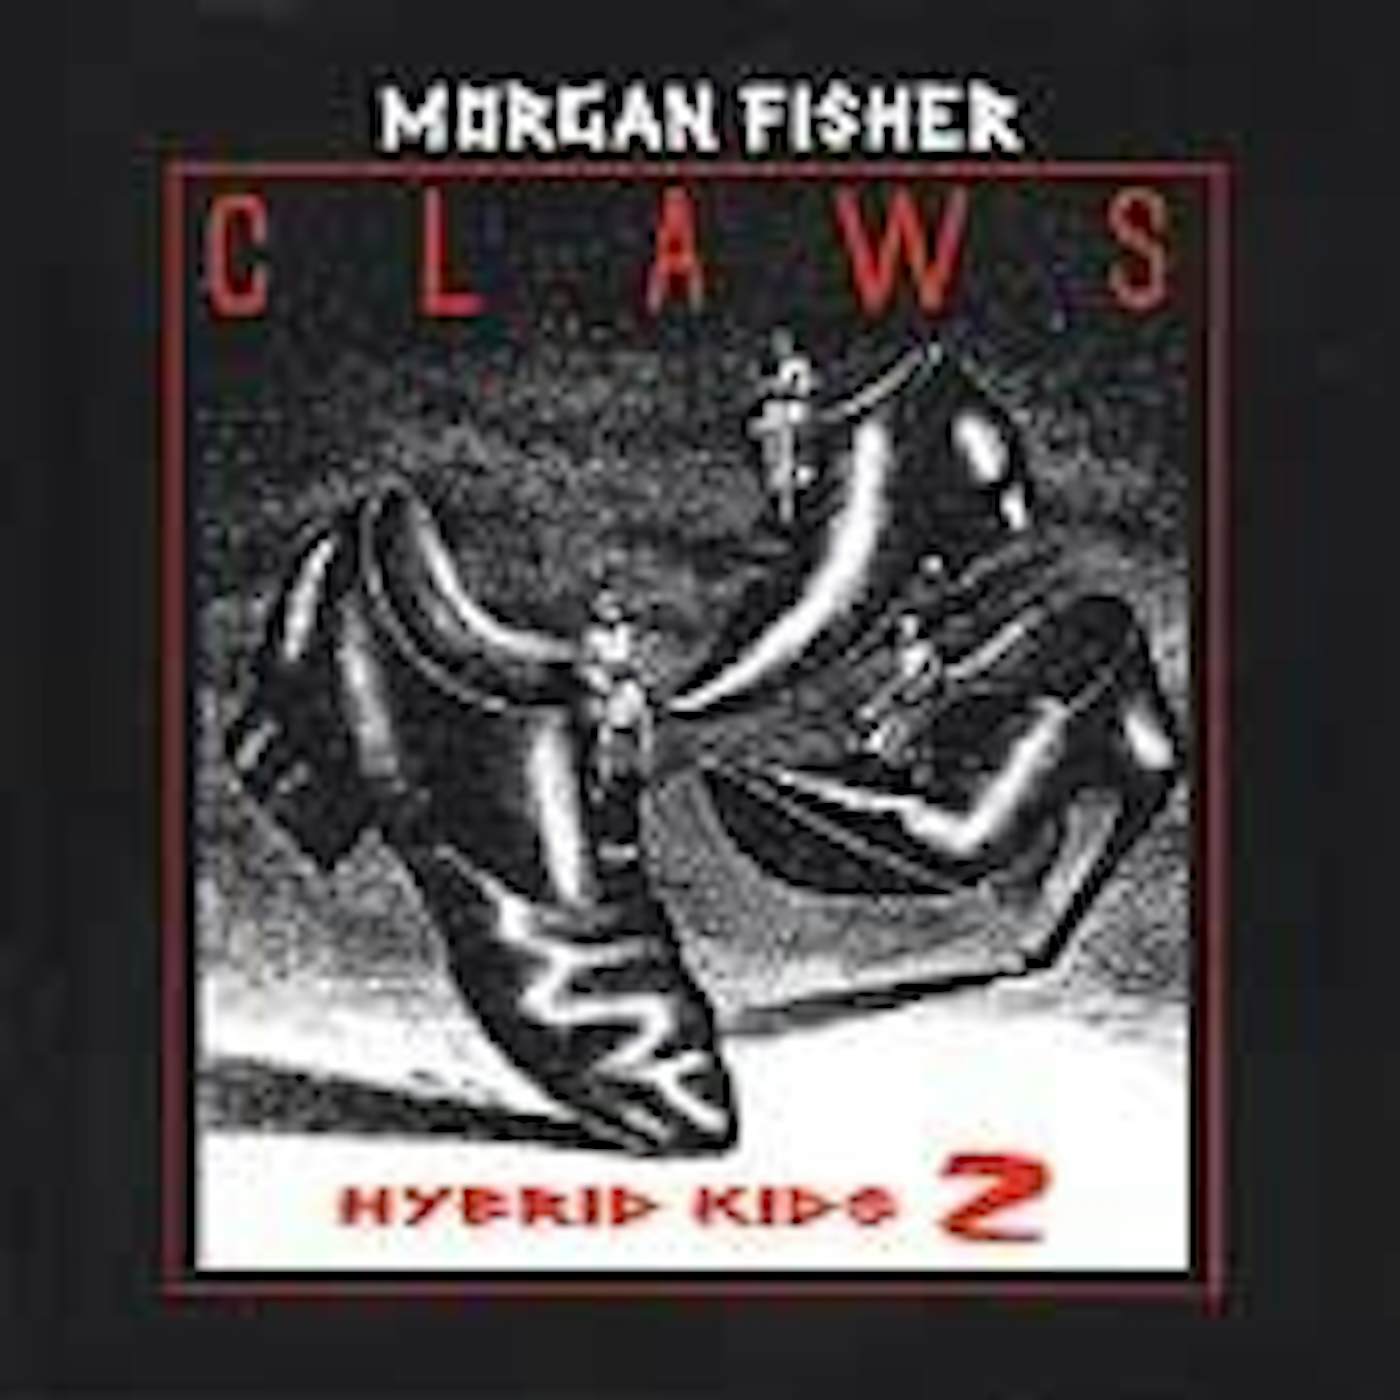 Morgan Fisher CLAWS CD